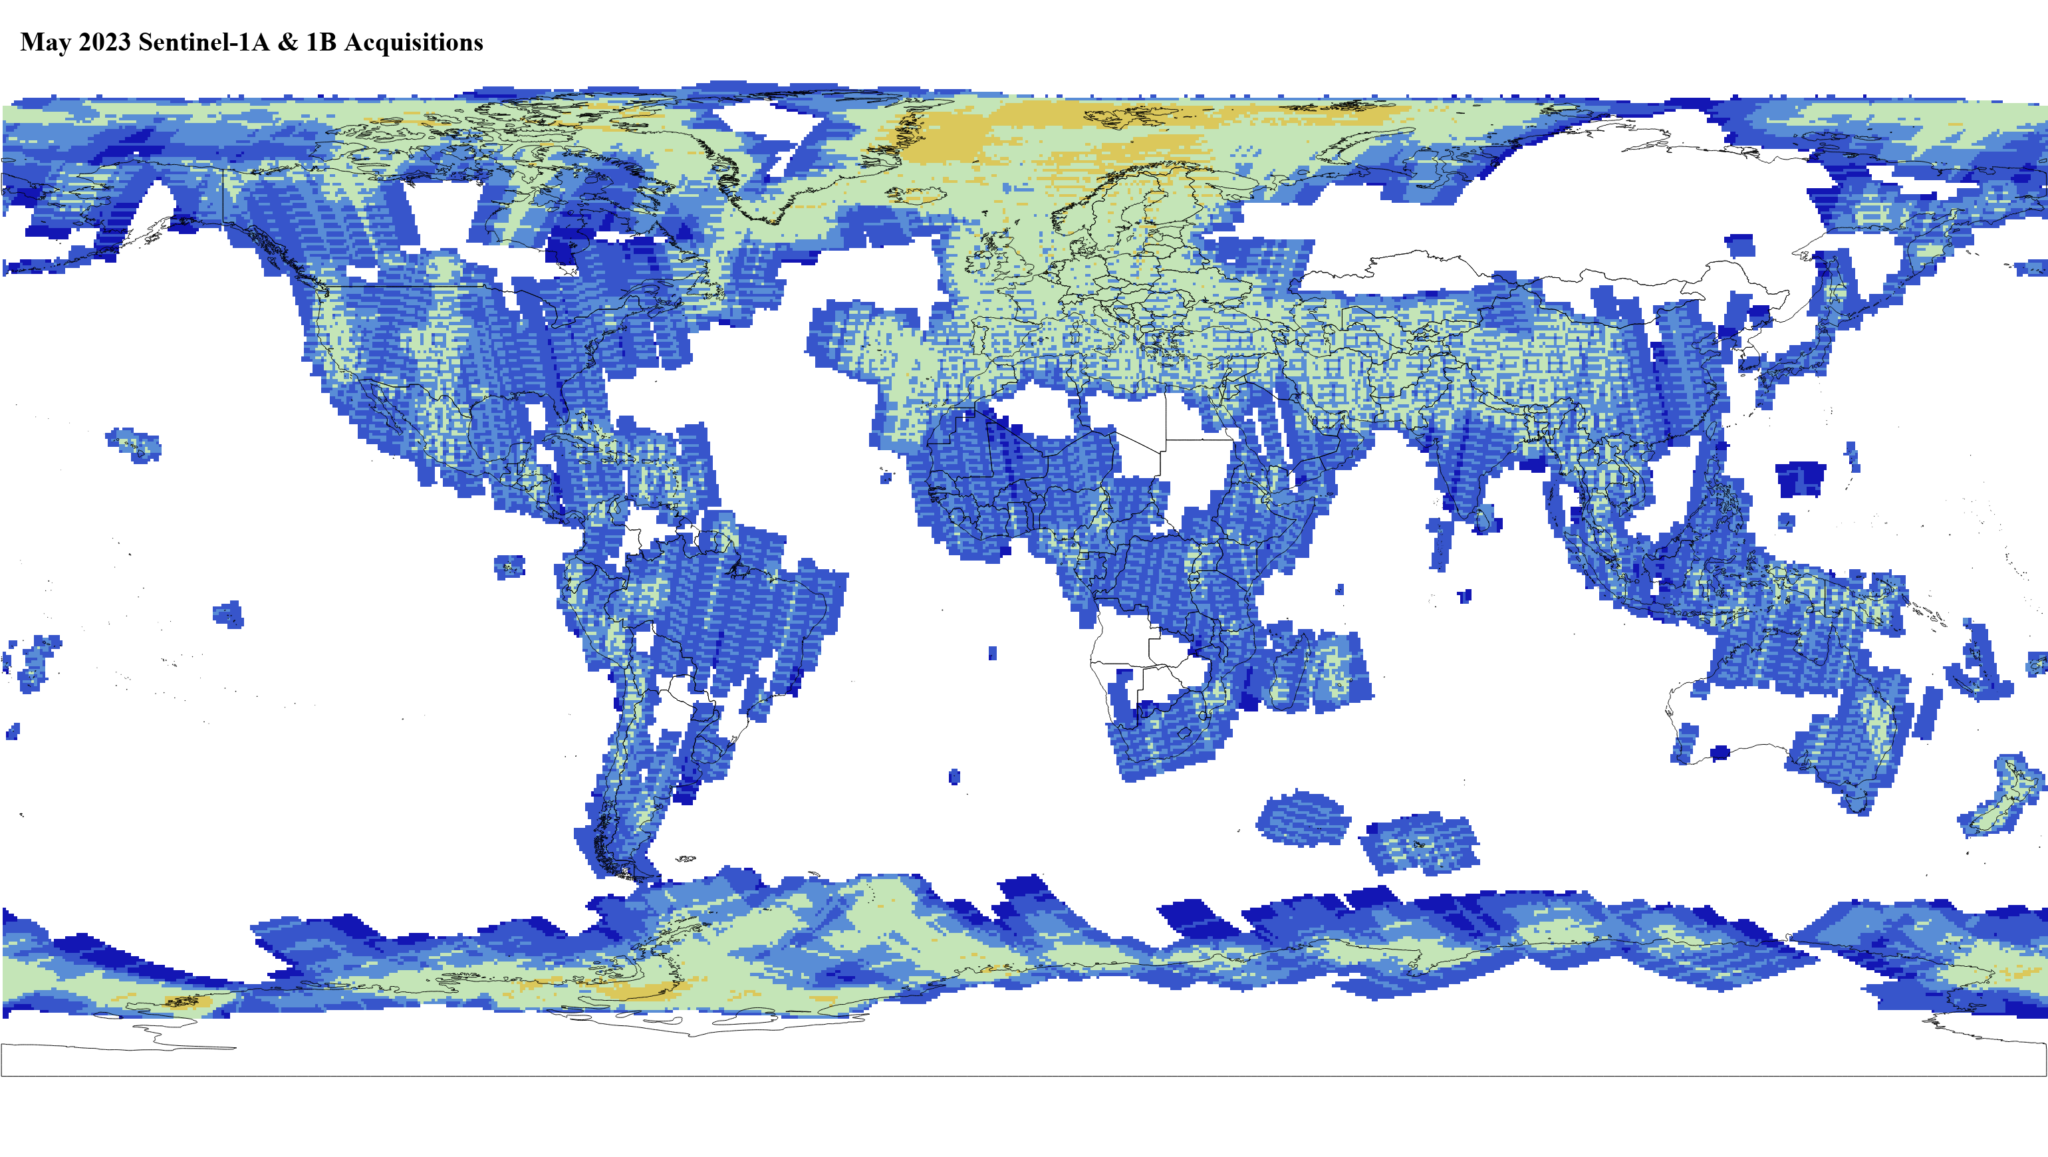 Heat map of Sentinel-1A and -1B GRD global acquisitions May 2023